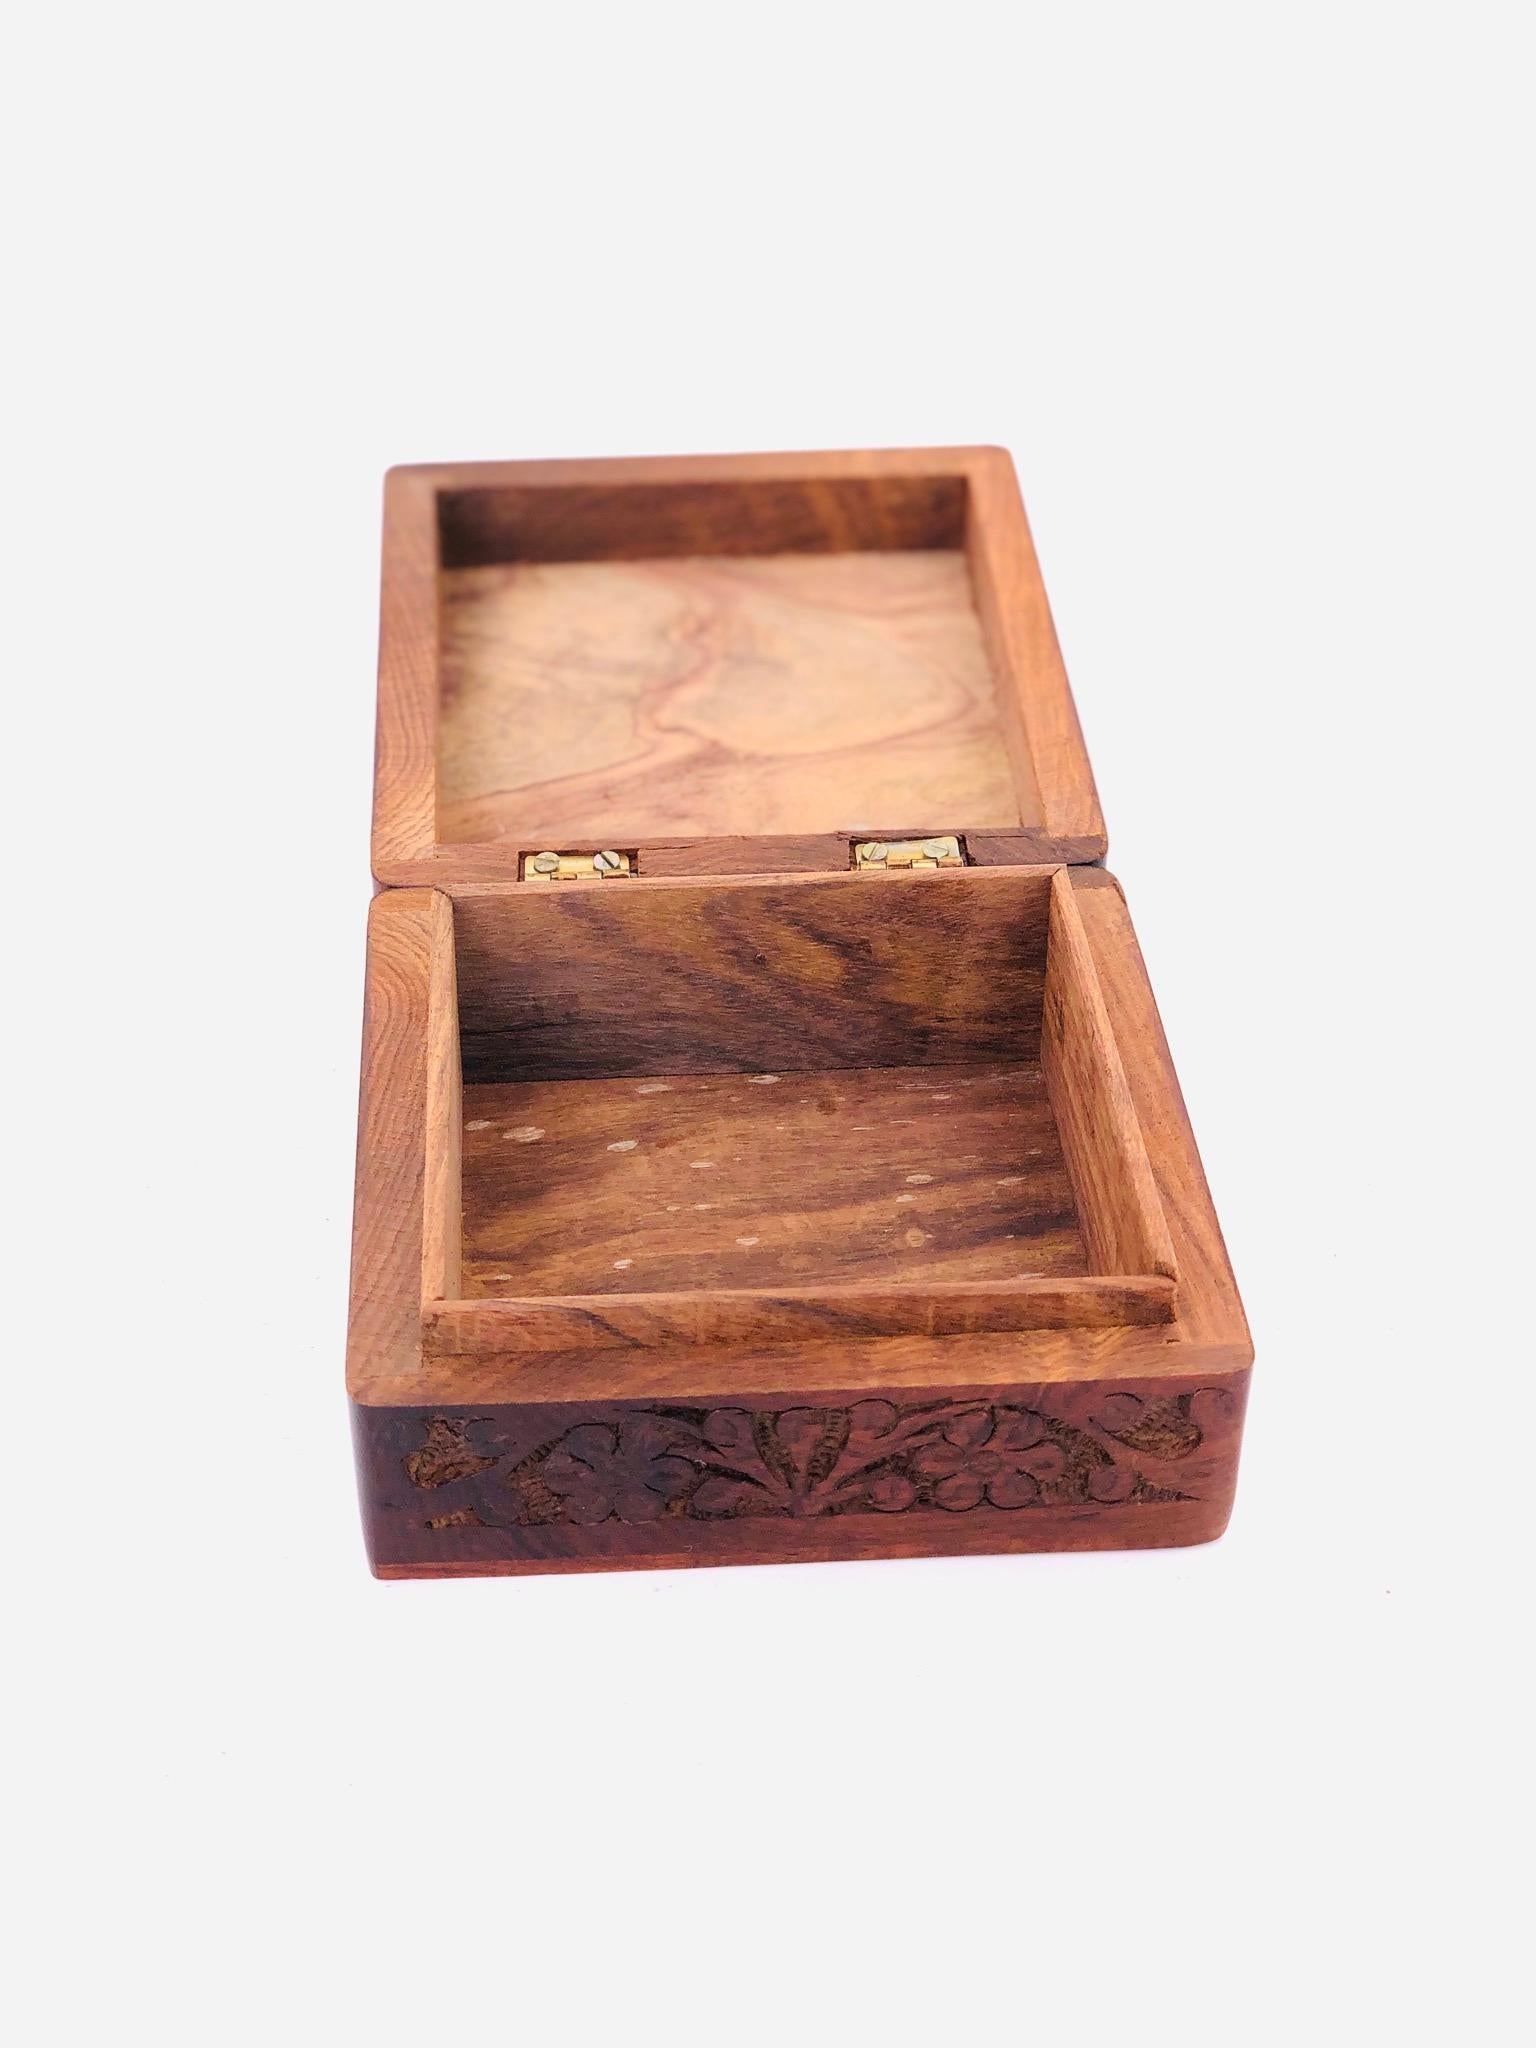 Indian Petite Solid Rosewood Hand Carved Jewelry Box